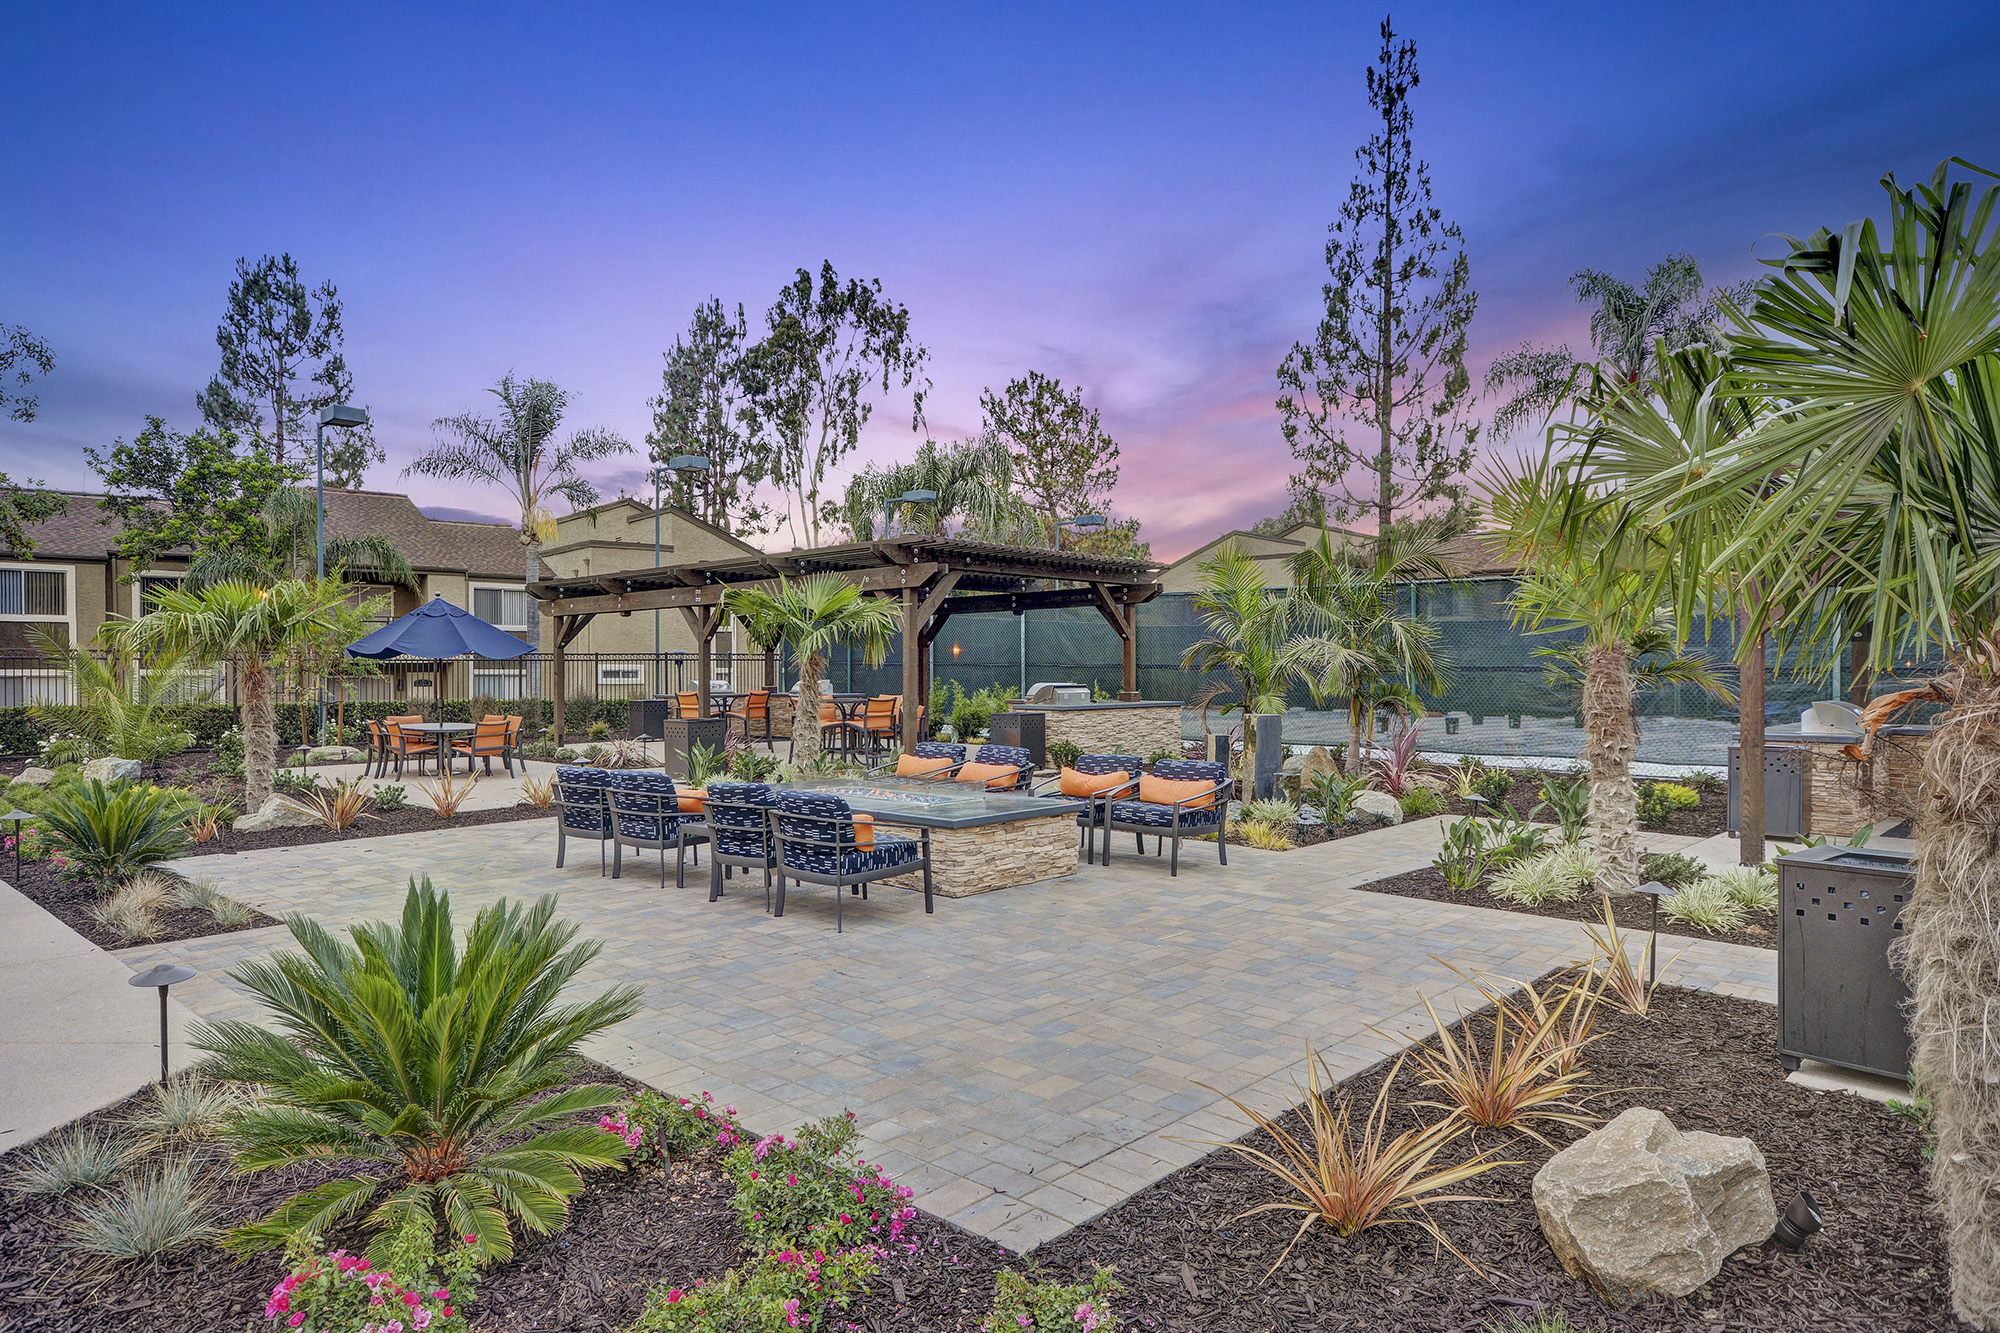 Outdoor seating areas and amenities